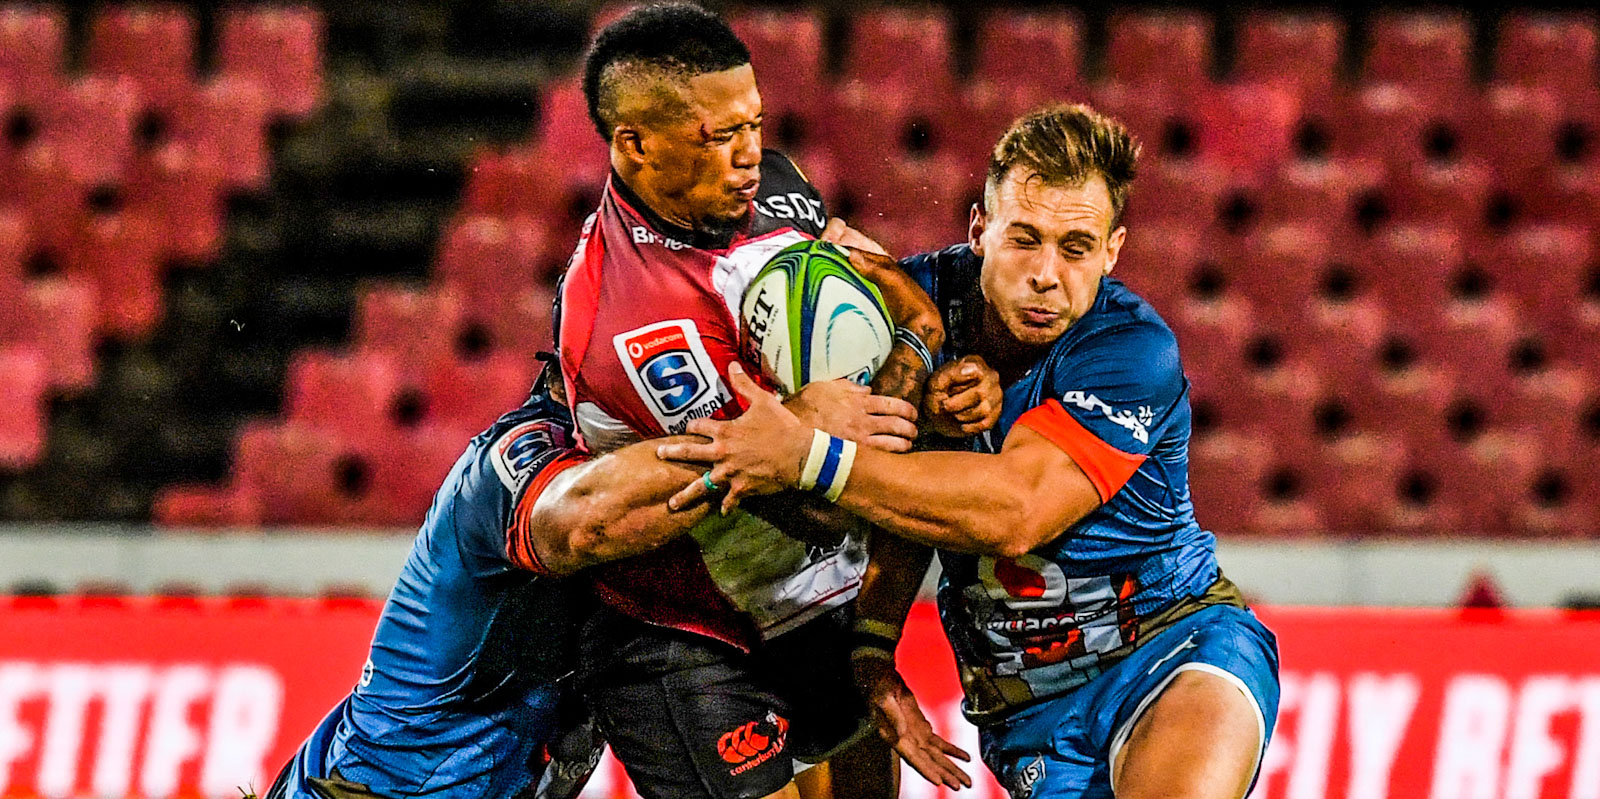 Elton Jantjies will again lead the Xerox Lions' charge in Pretoria